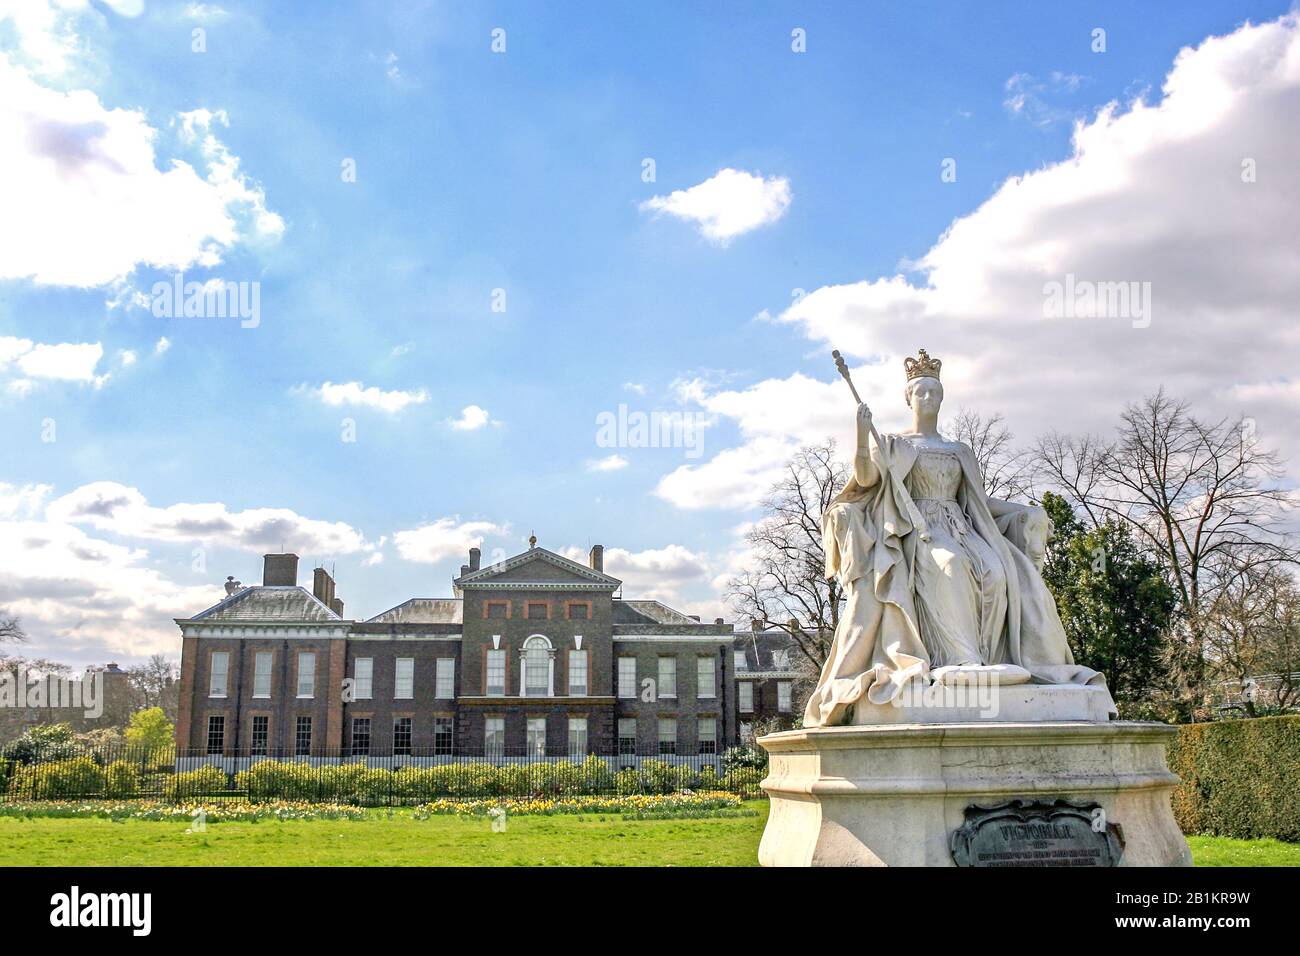 Statue of Queen Victoria stands in front of her birthplace and former residence, Kensington Palace, London, England. Stock Photo